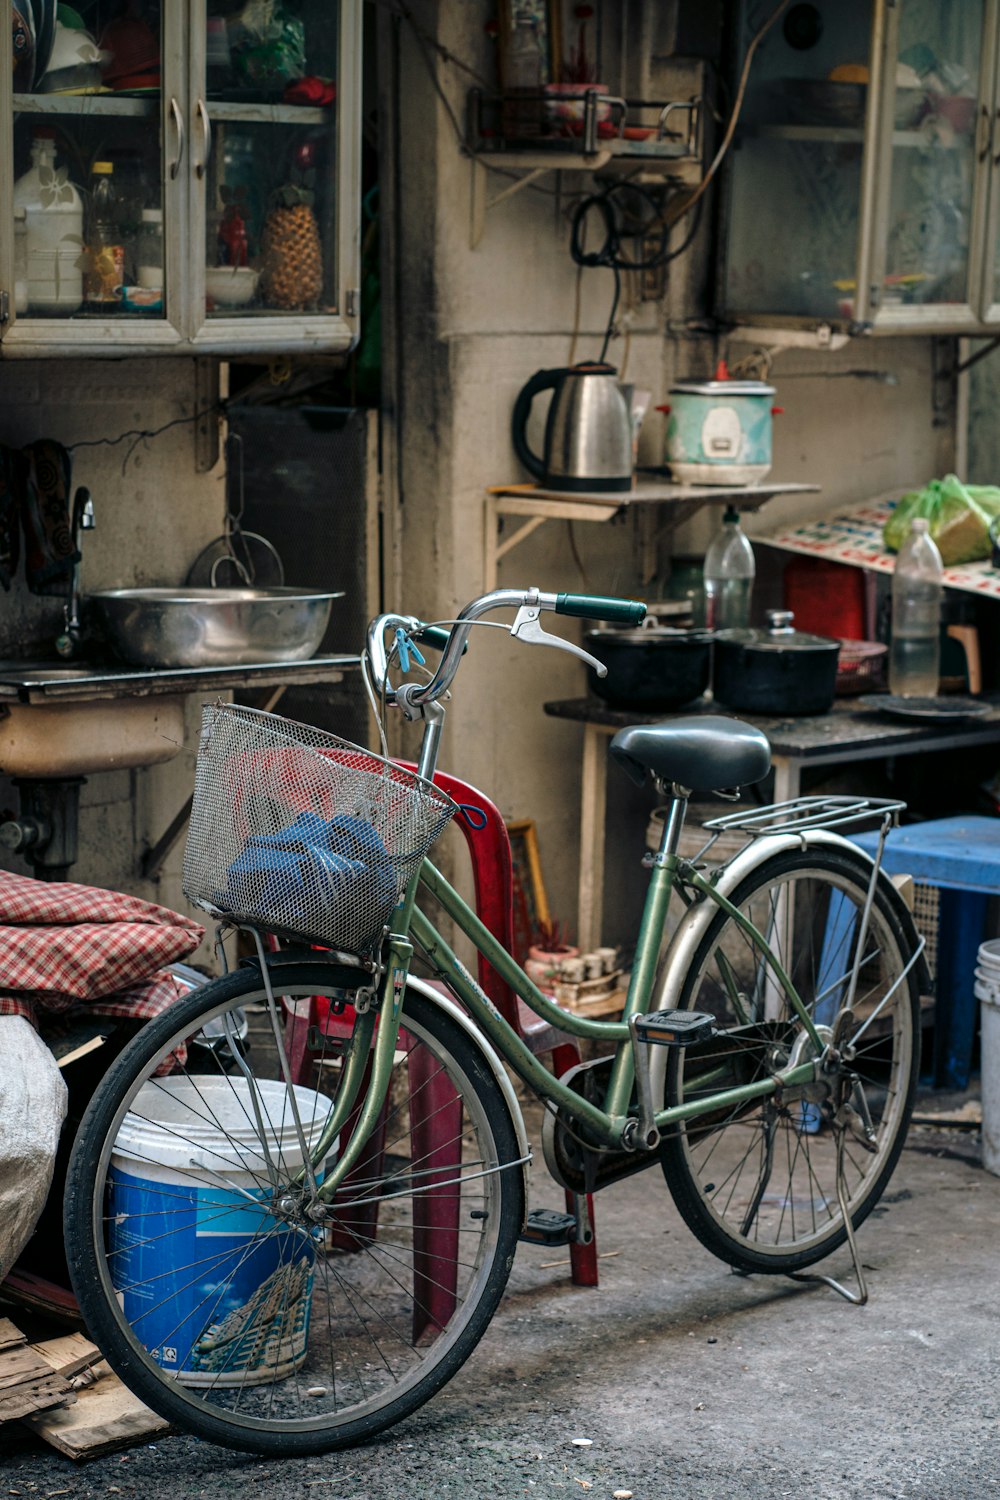 a bicycle parked in front of a kitchen